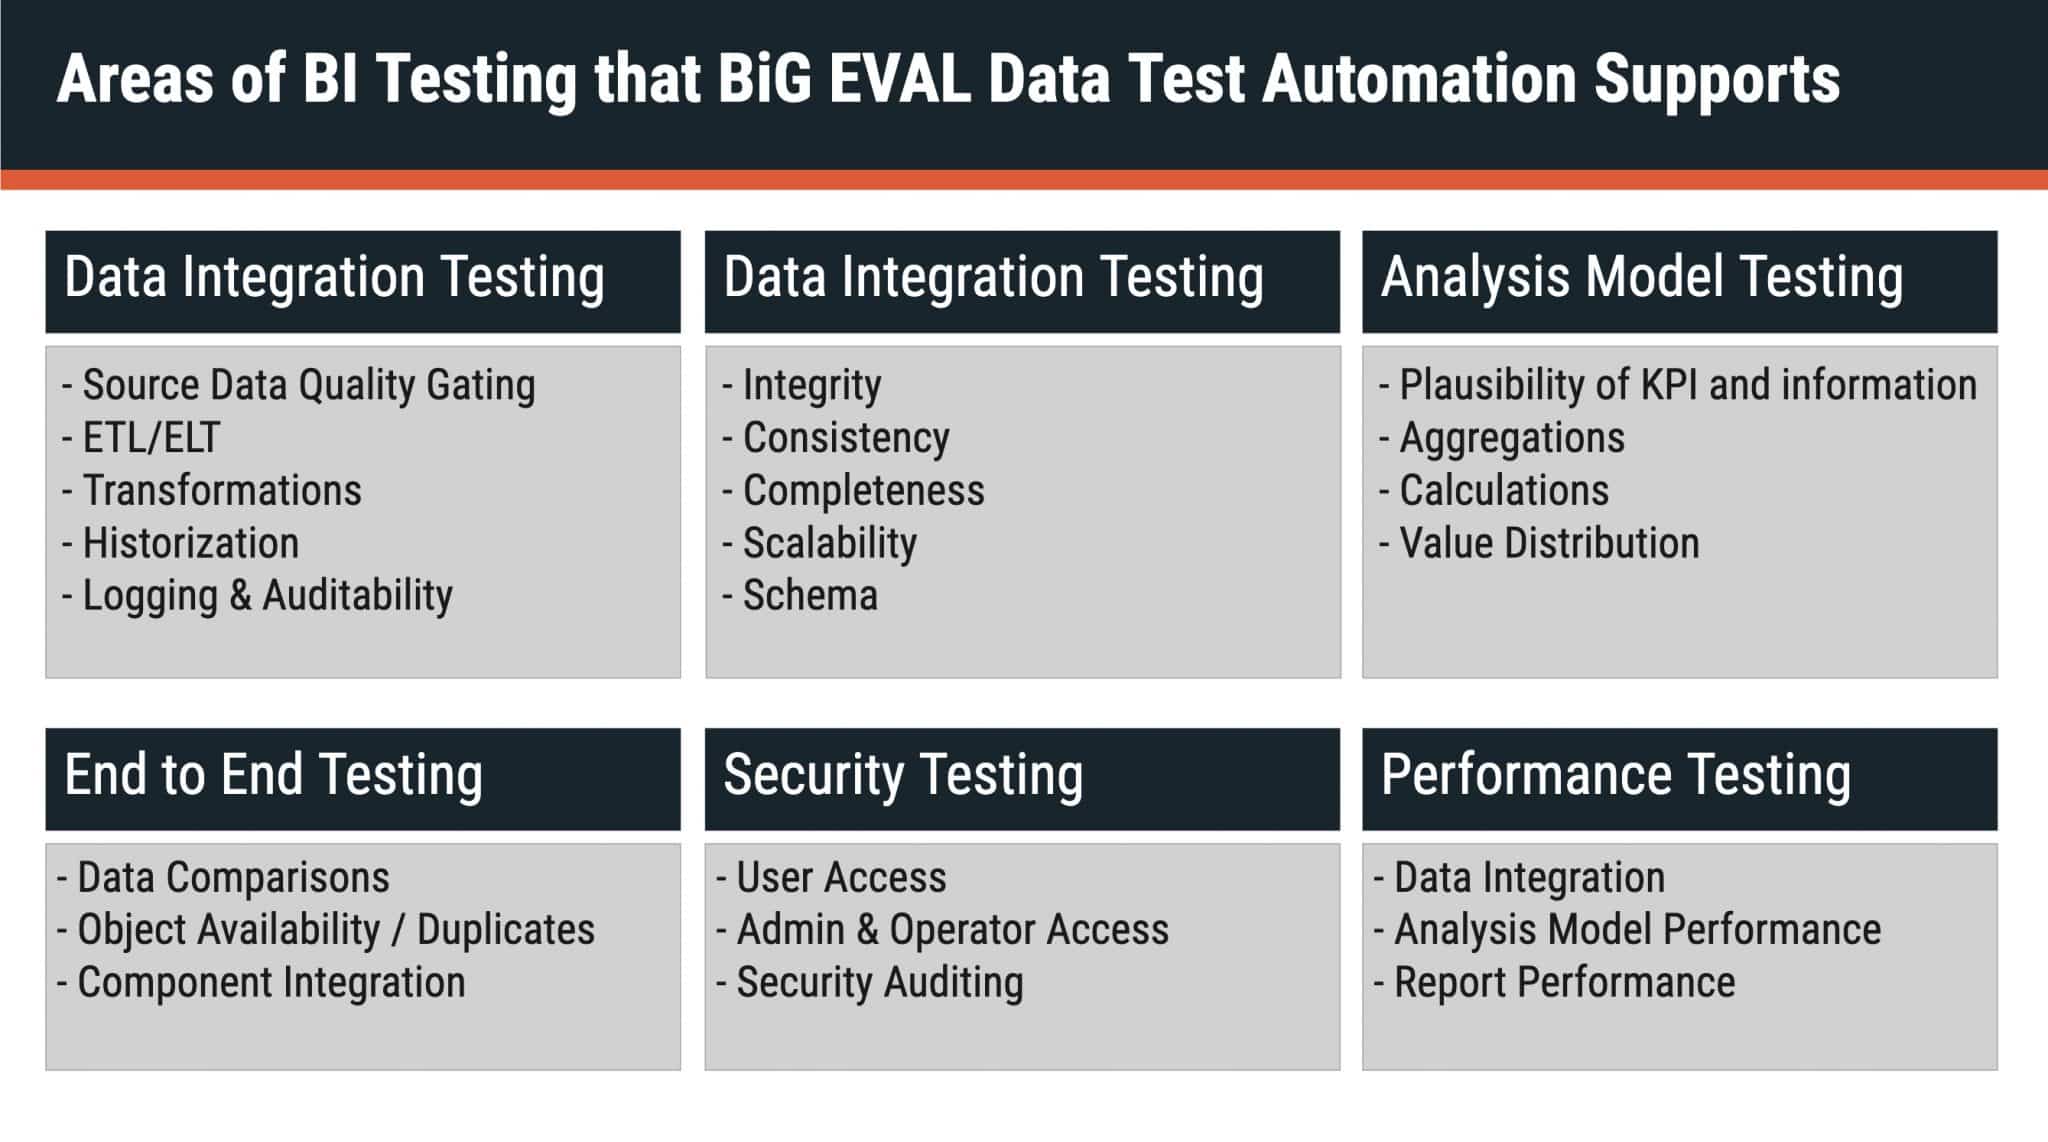 BI Testing Supported by BiG EVAL Data Quality Software: Data Integration, Analysis Model, End to End, Security Testing, & Performance Testing.